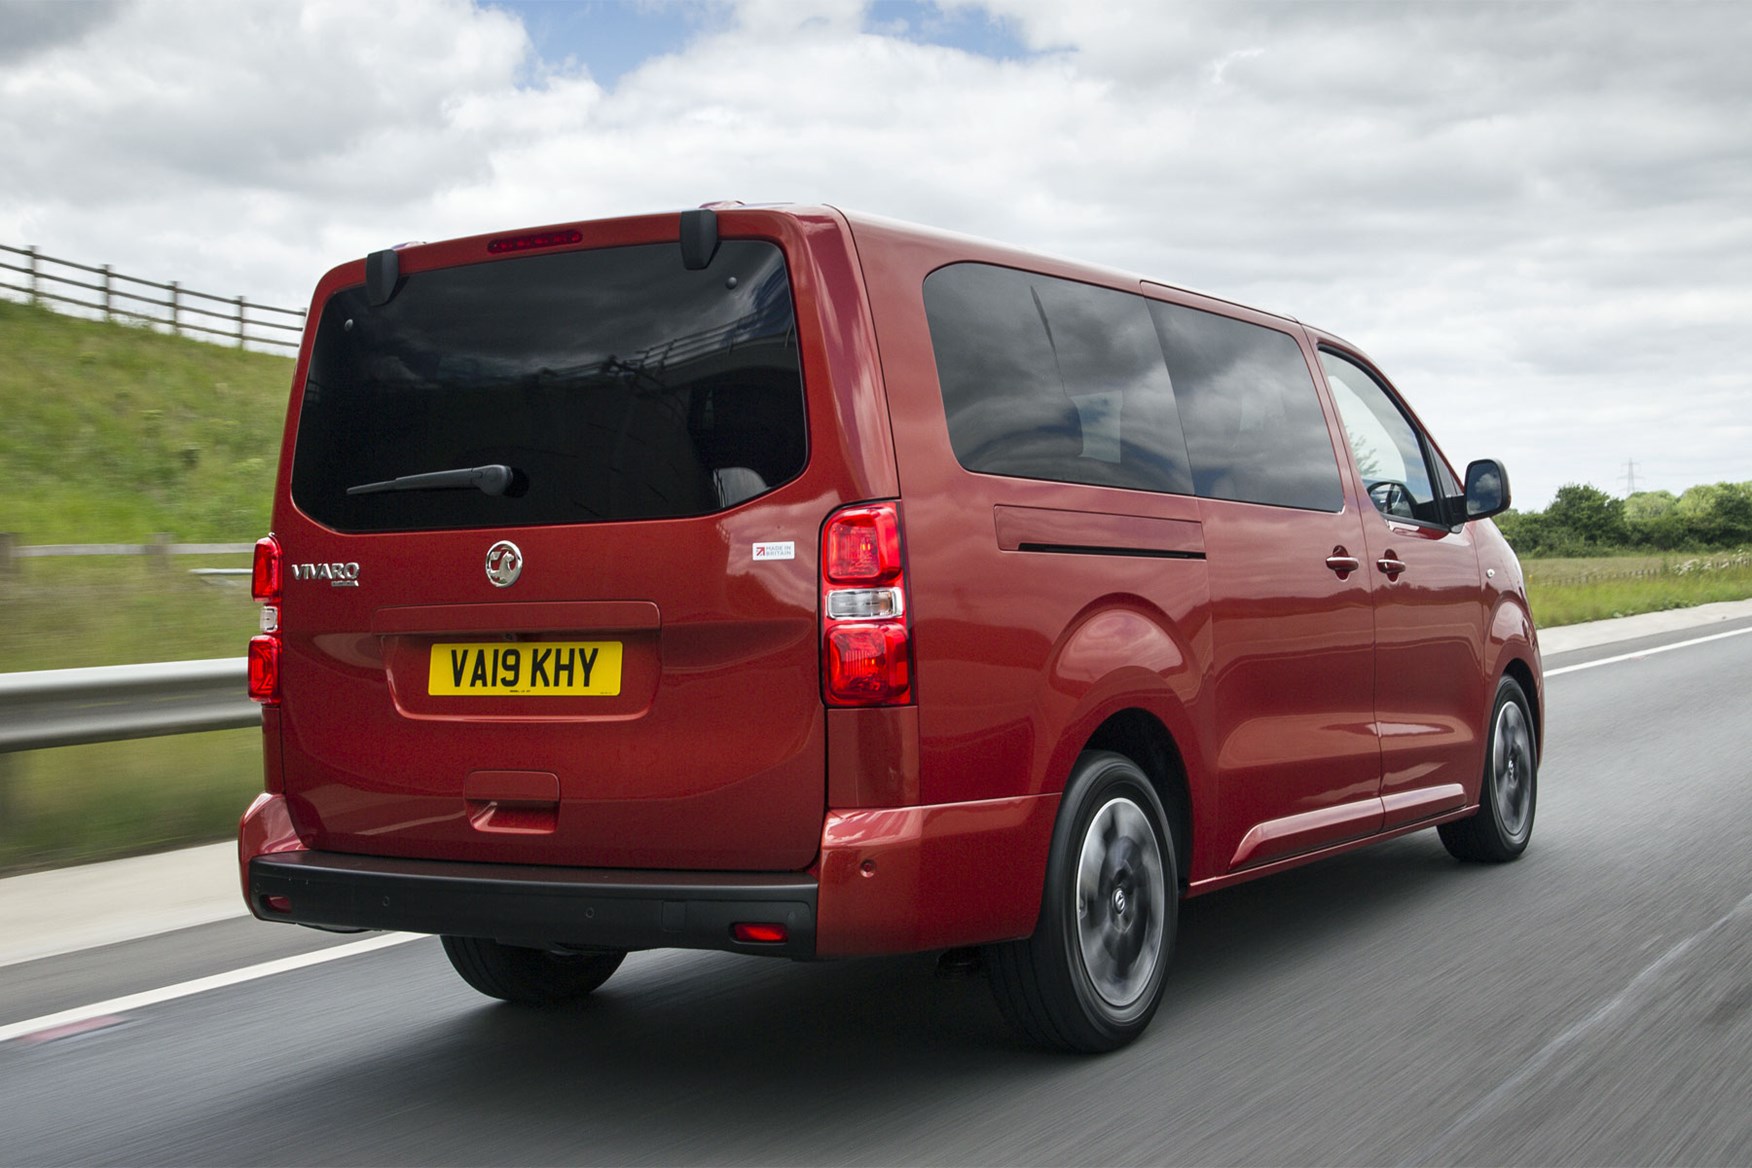 Is the best car actually a van? |